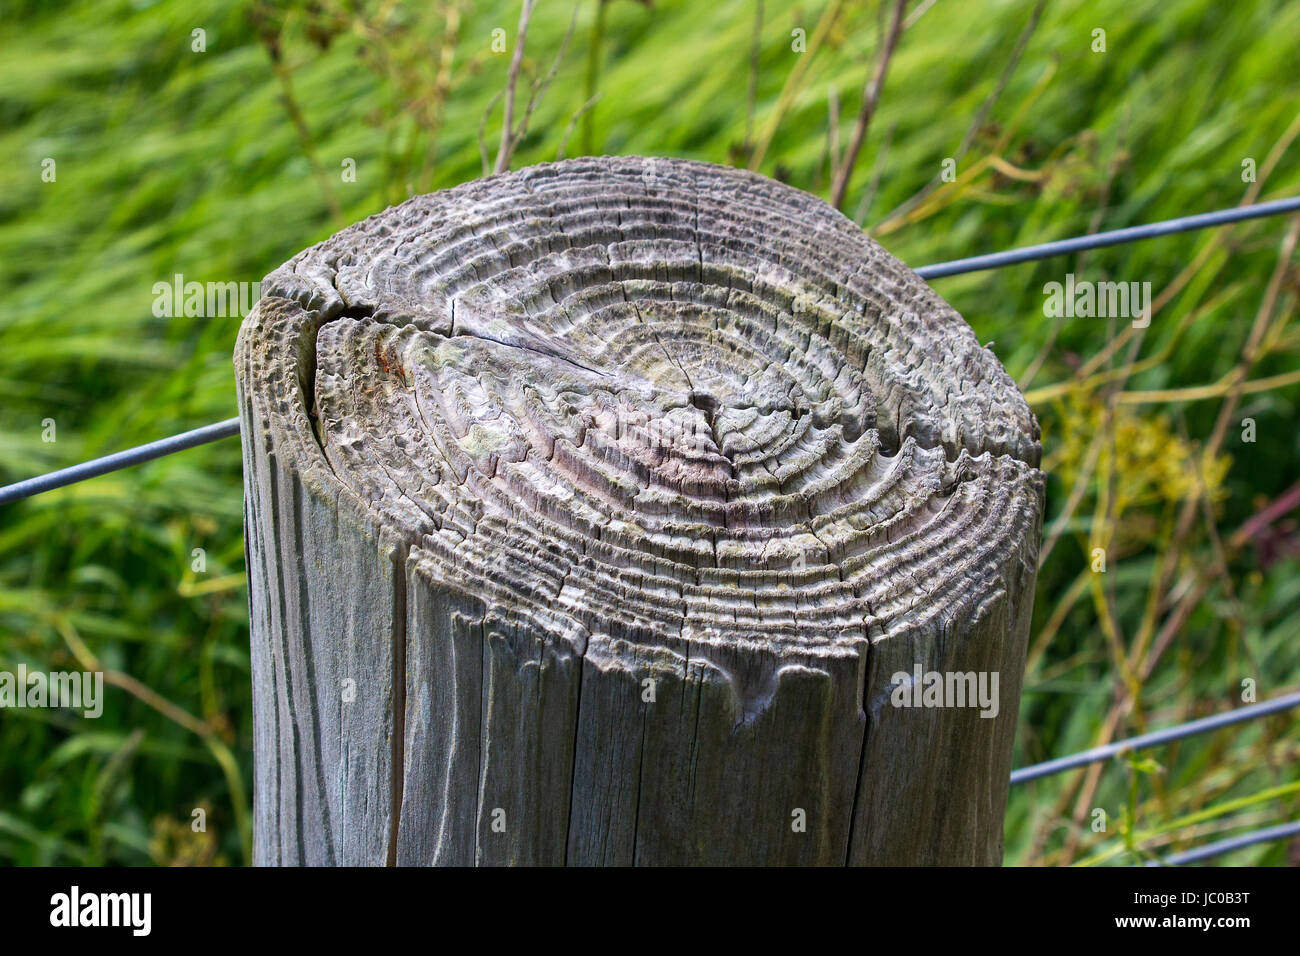 The top of an old and weathered agricultural fence post showing the growth circles by which a tree's age can be determined Stock Photo